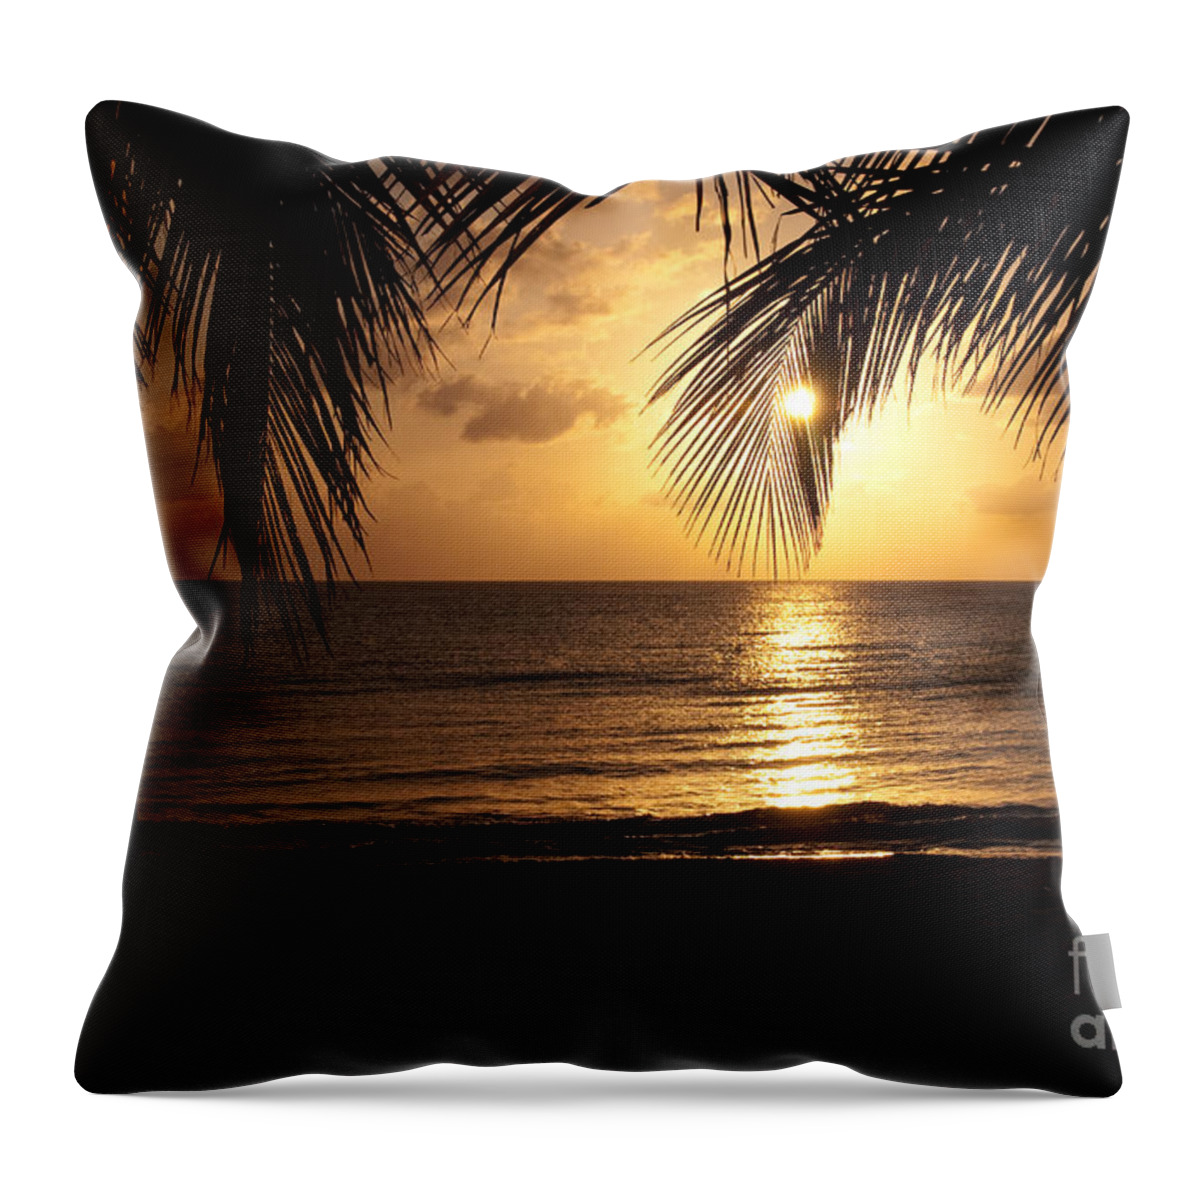 Island Throw Pillow featuring the photograph Island Sunset by Charles Dobbs